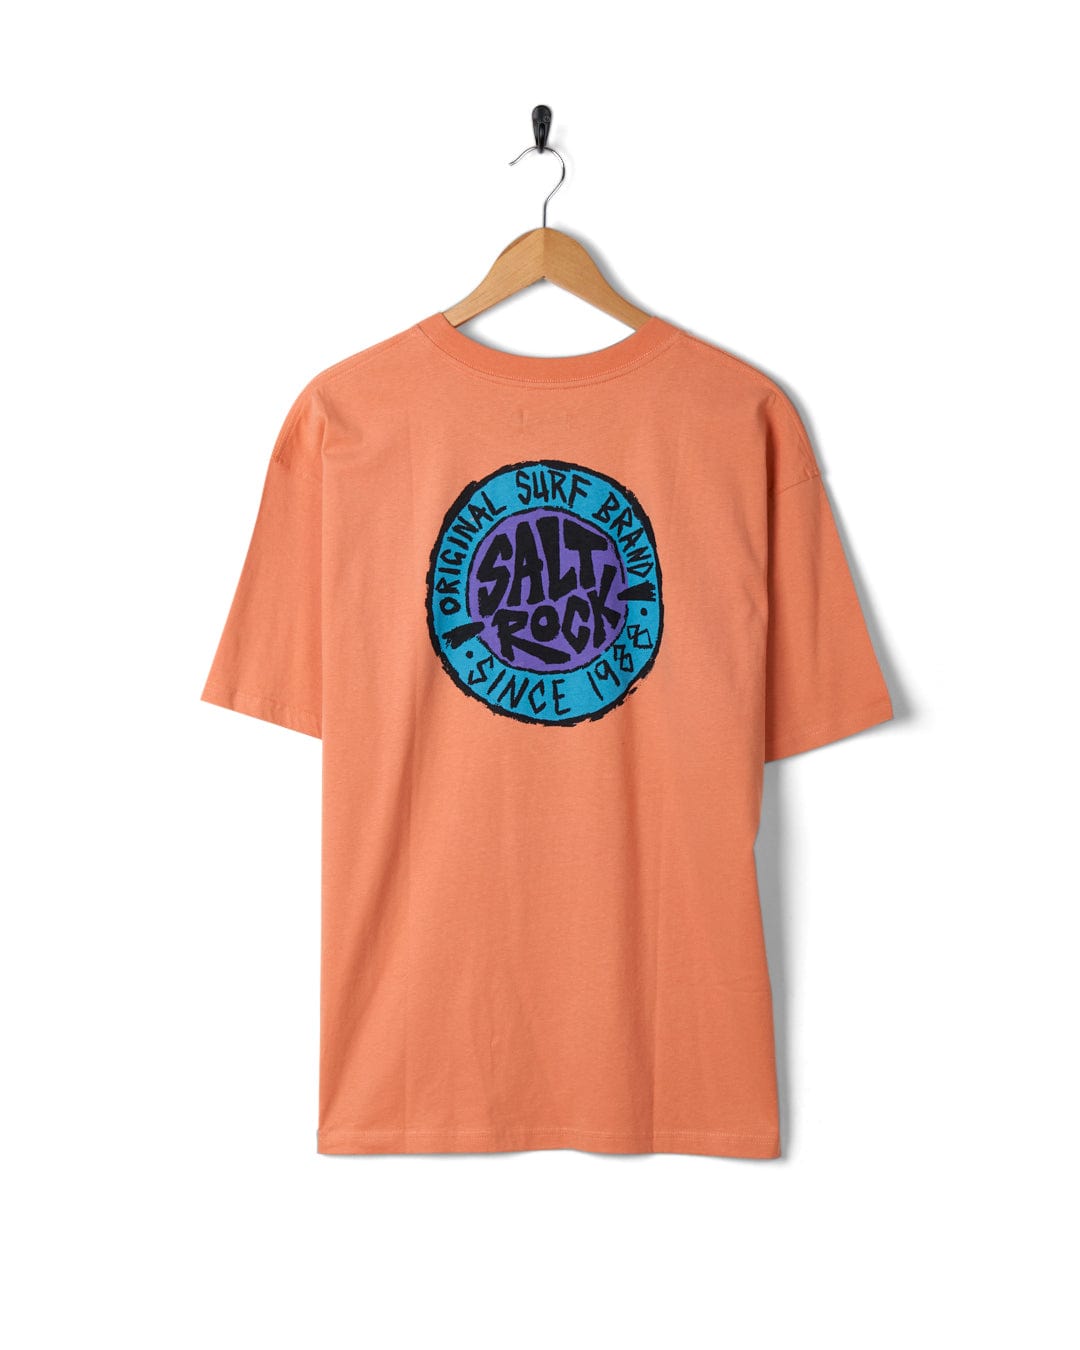 Peach Saltrock t-shirt with retro surf graphic print hanging on a white wall.